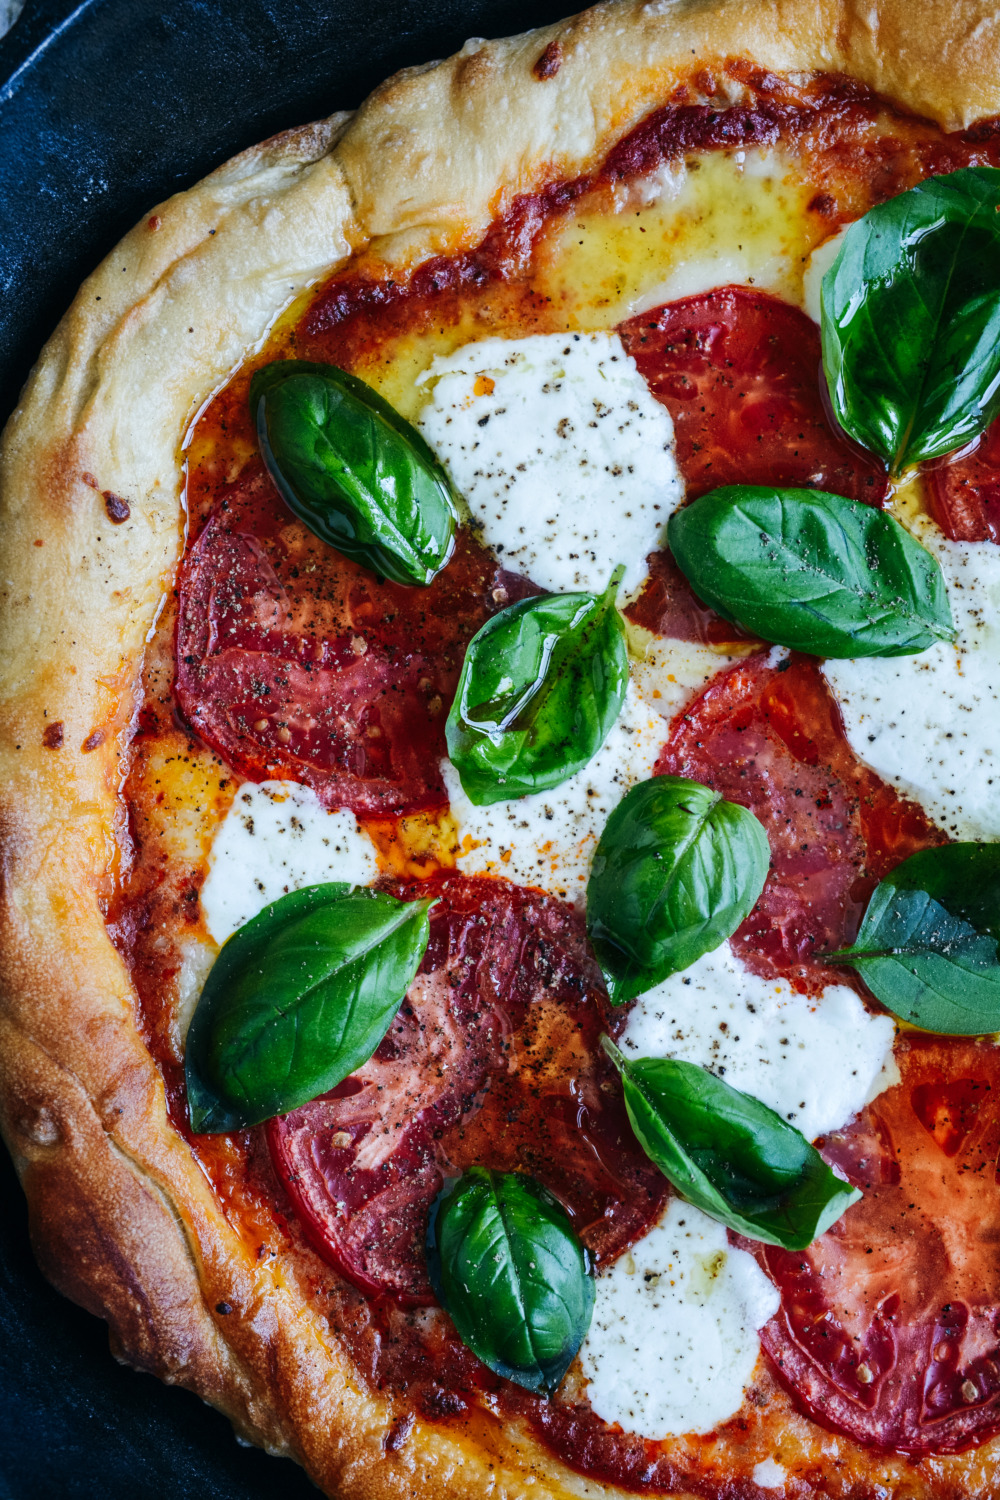 https://ciaochowbambina.com/wp-content/uploads/2020/10/Cast-Iron-Margherita-Pizza-with-Burrata-1-of-10-1-of-1.jpg